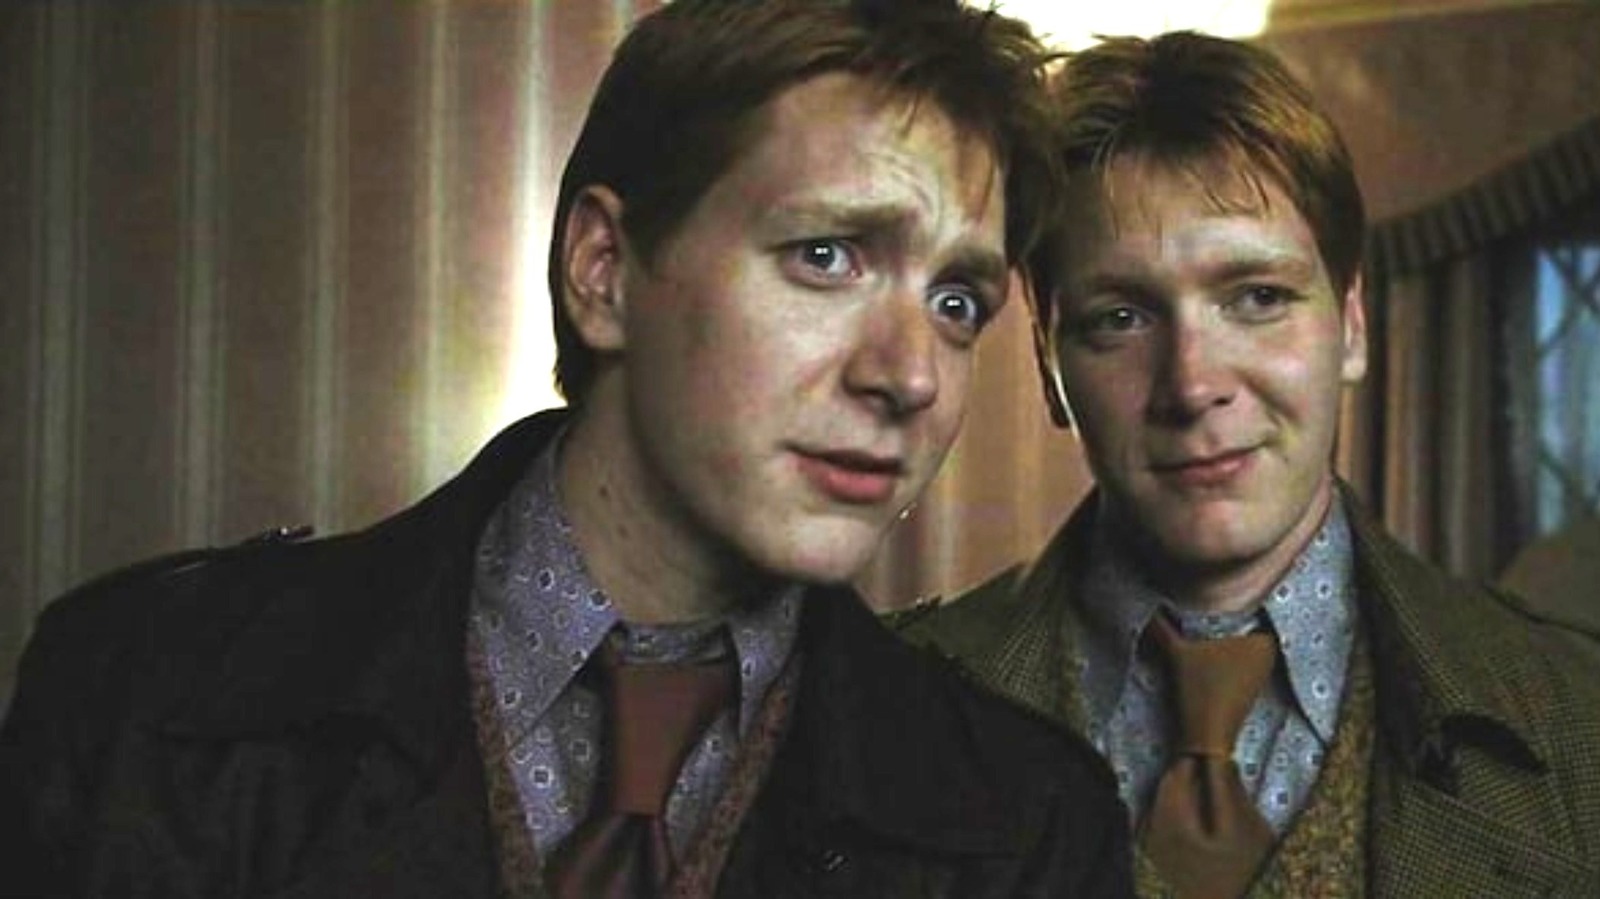 Fred & George Weasley Character Analysis: Twin Pranksters